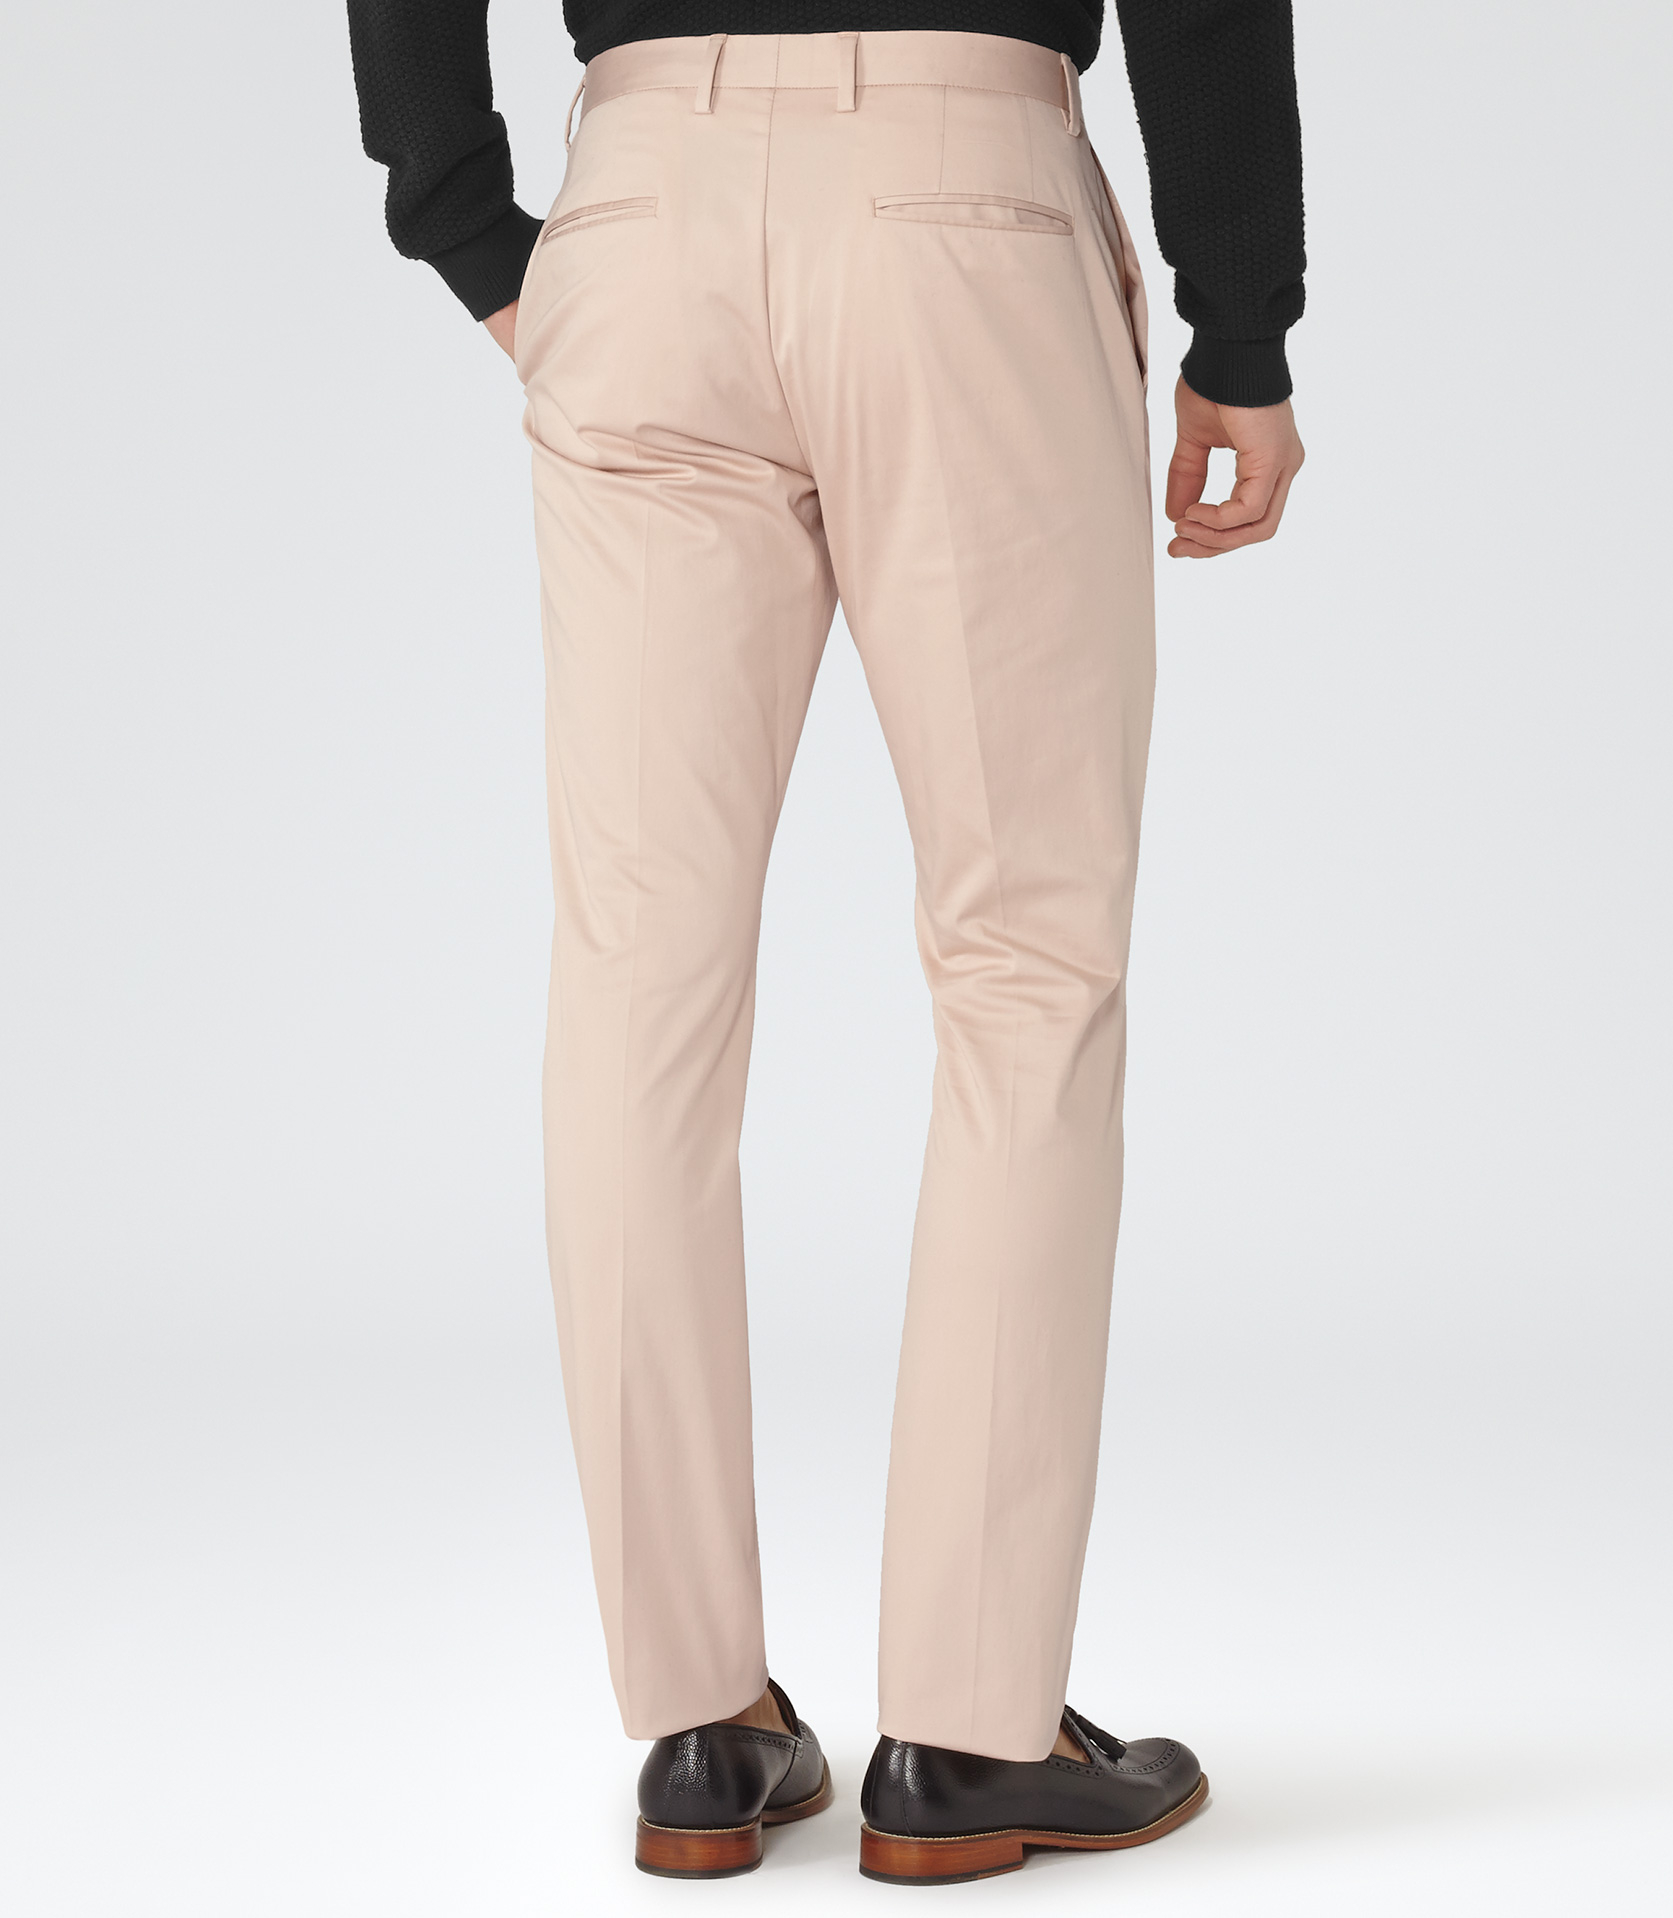 Reiss Bandon Slim-Fit Chinos in Salmon (Pink) for Men - Lyst